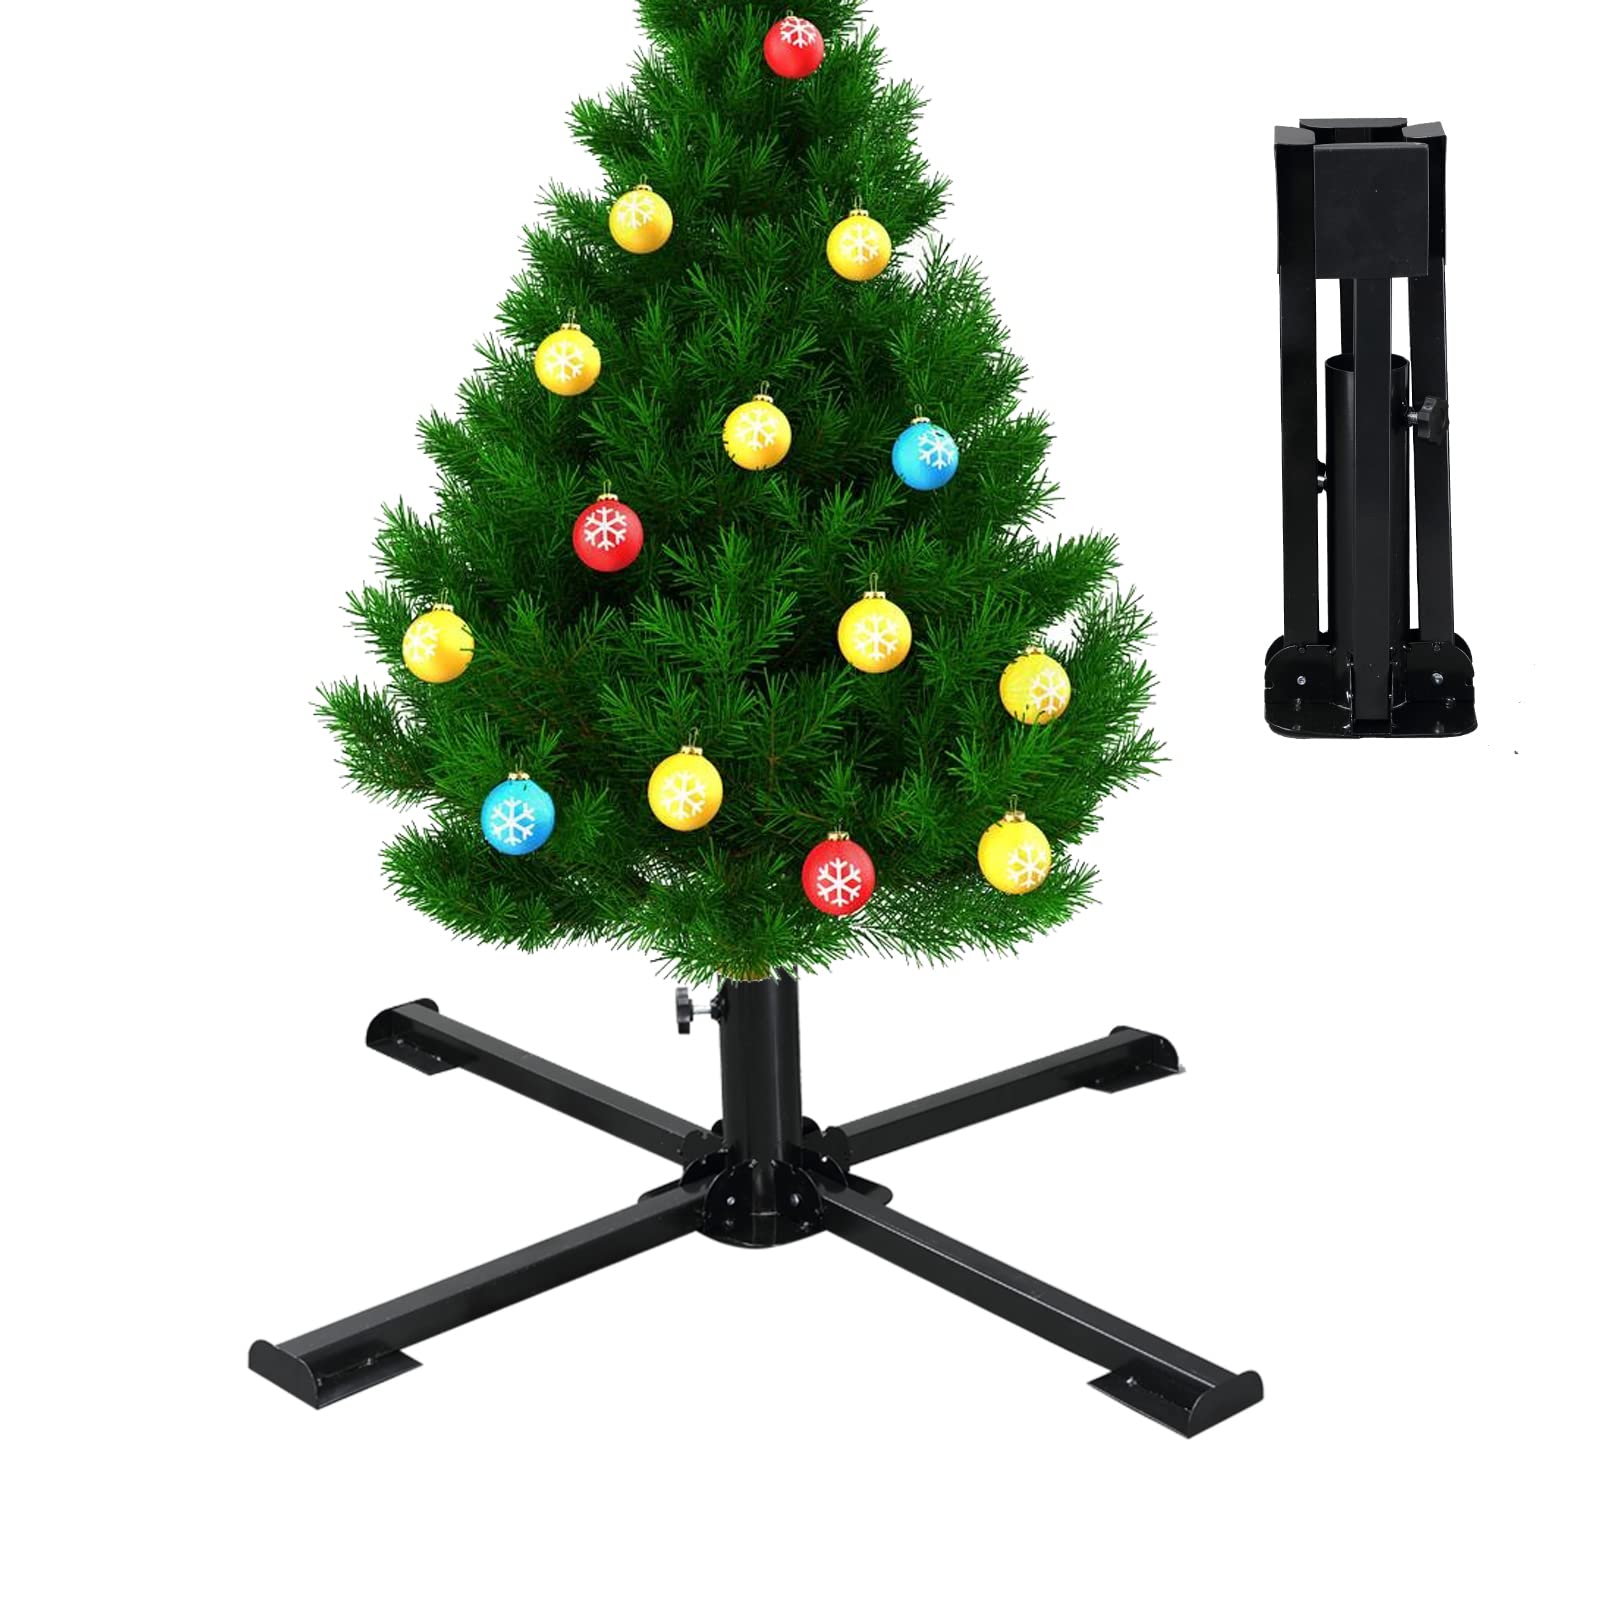 Where Can I Buy A Christmas Tree Stand?